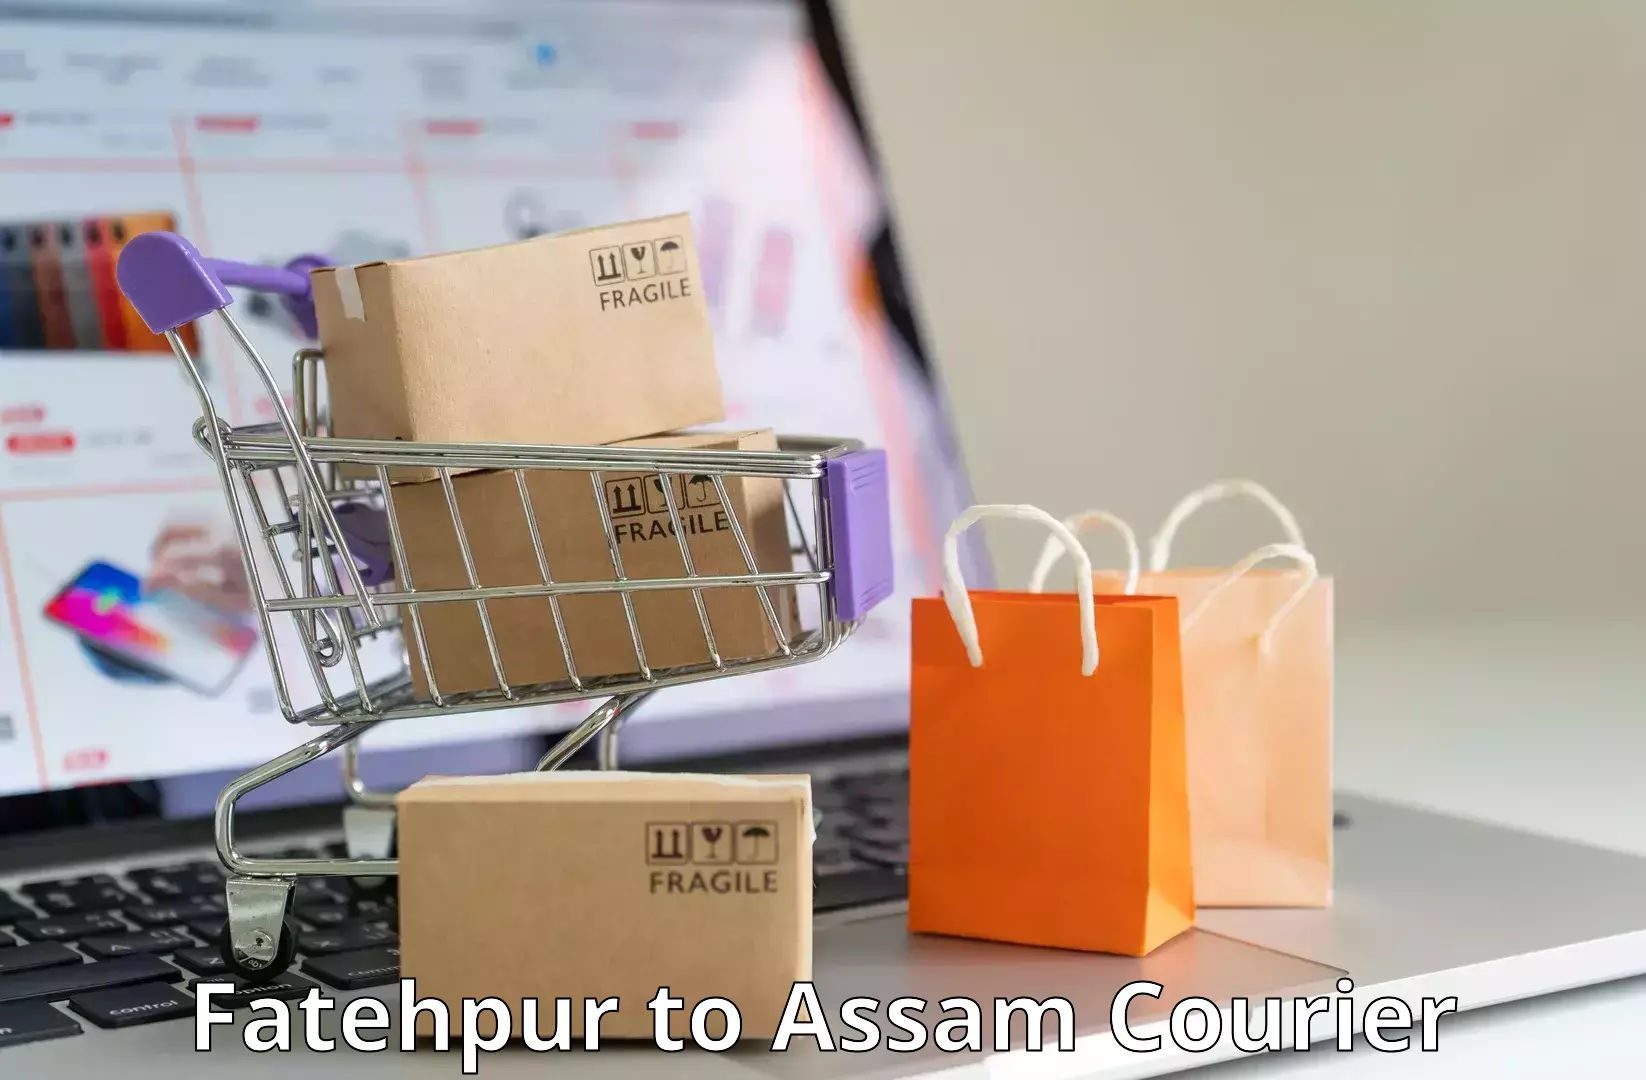 Full-service courier options Fatehpur to Dudhnoi